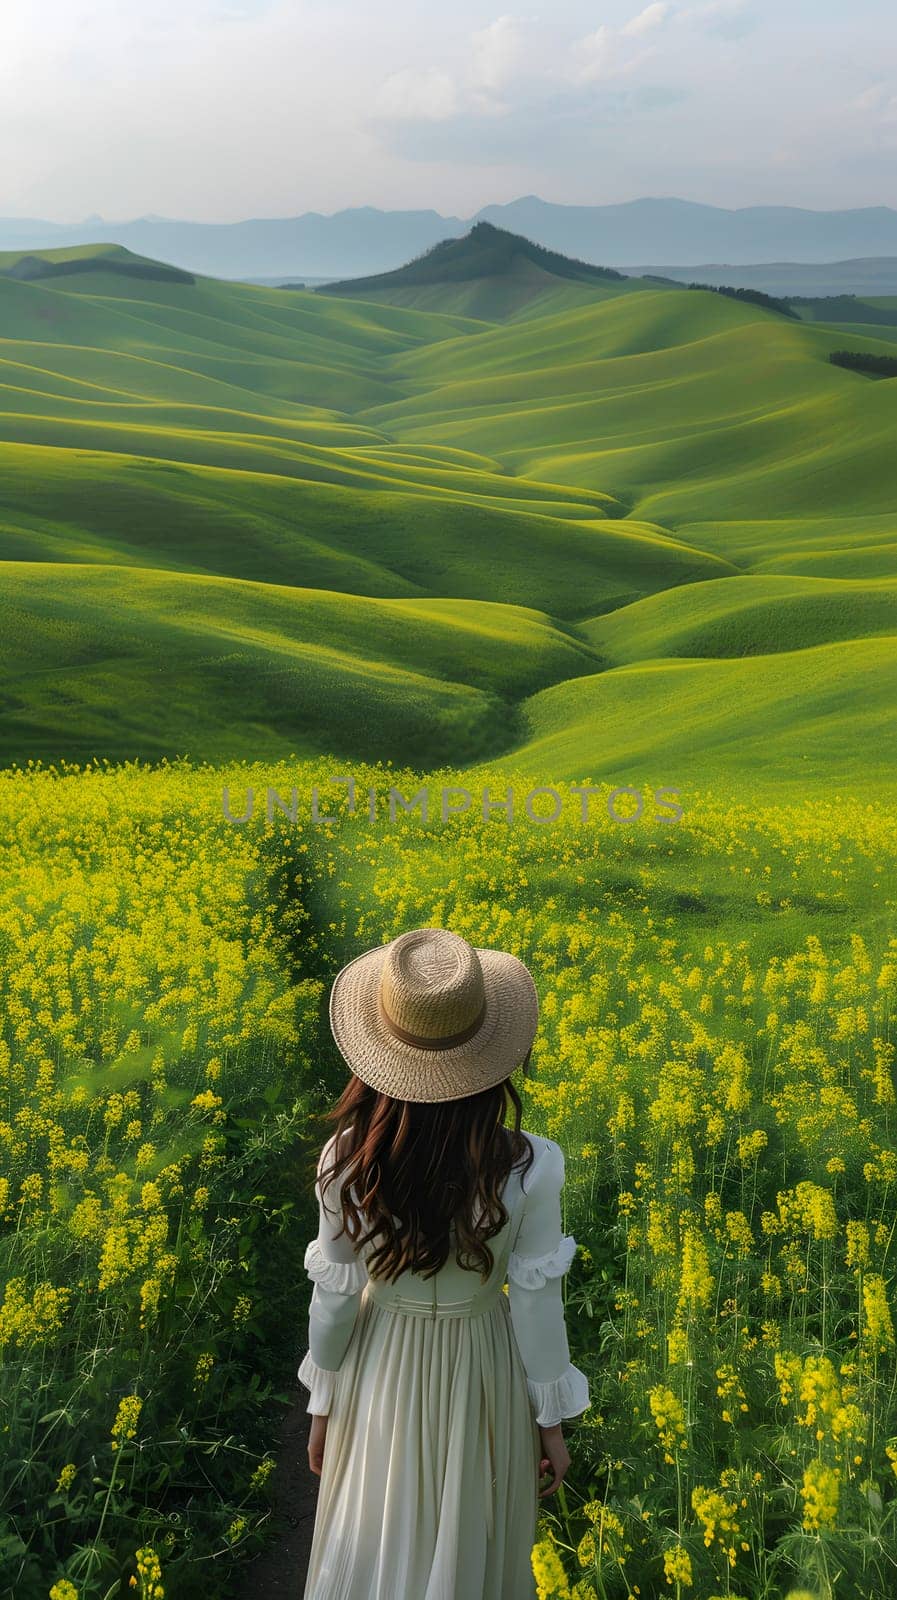 A lady wearing a white dress and hat is happily standing in a field of yellow flowers, surrounded by the green natural landscape and grass